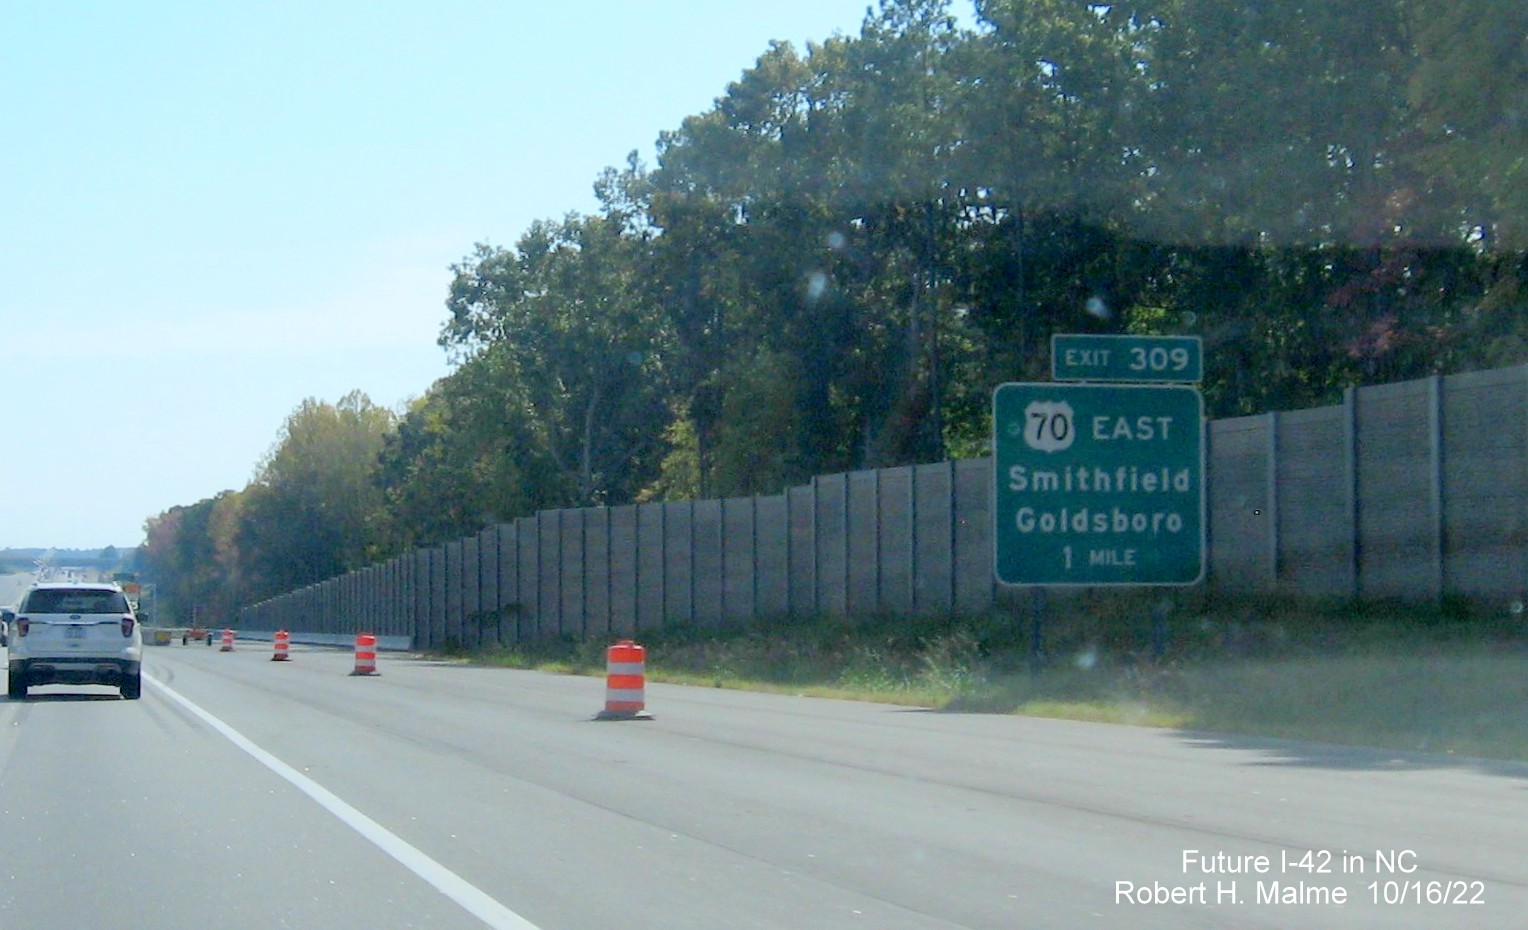 Image of ground mounted 1 mile advance sign for US 70 (Future I-42) East Clayton Bypass on I-40 East in widening zone construction area, October 2022